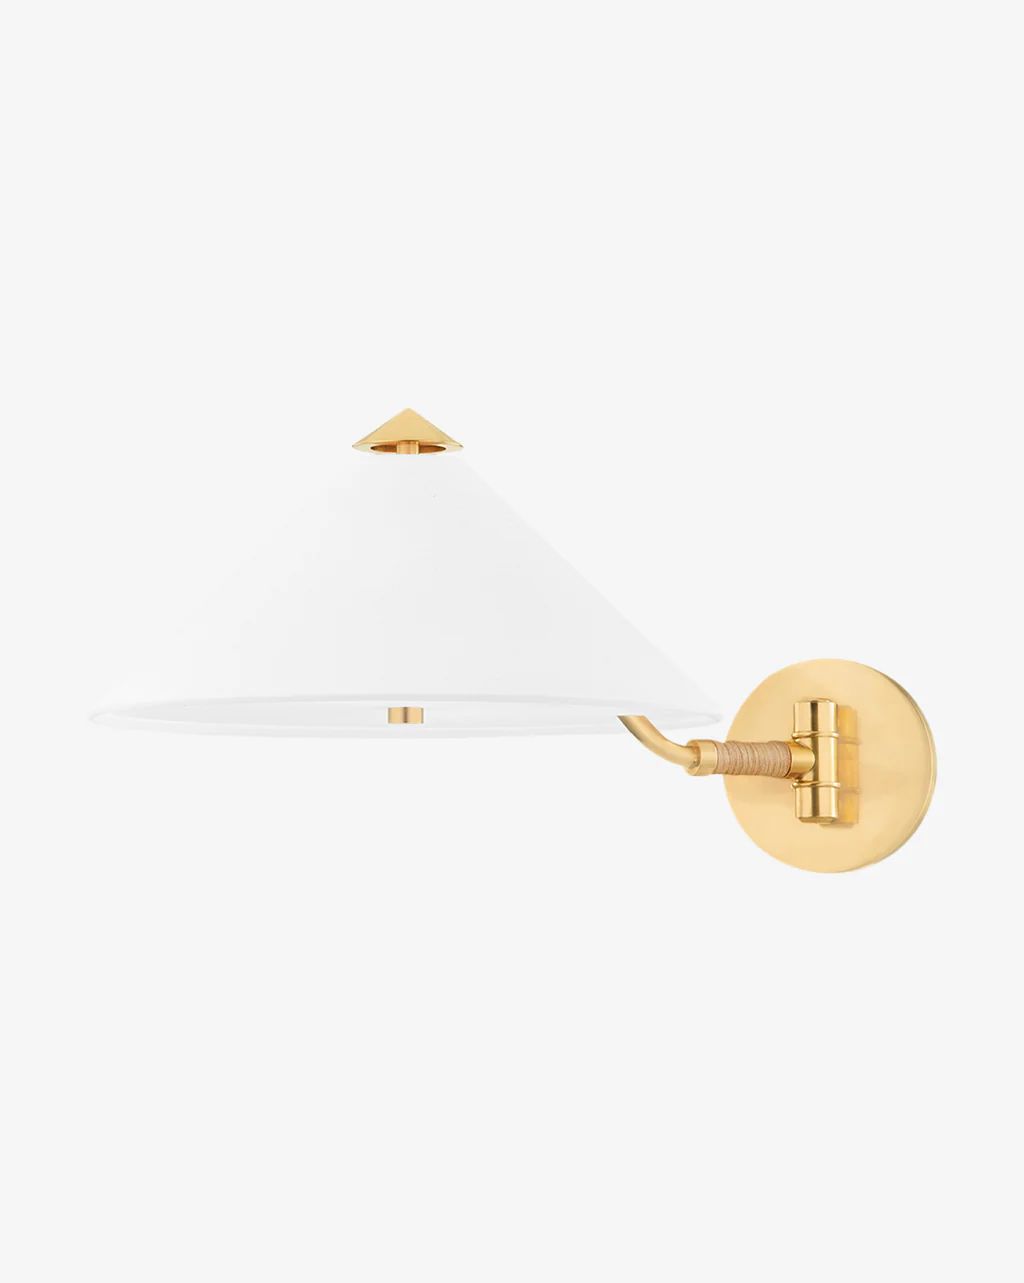 Williamsburg Wall Sconce | McGee & Co.